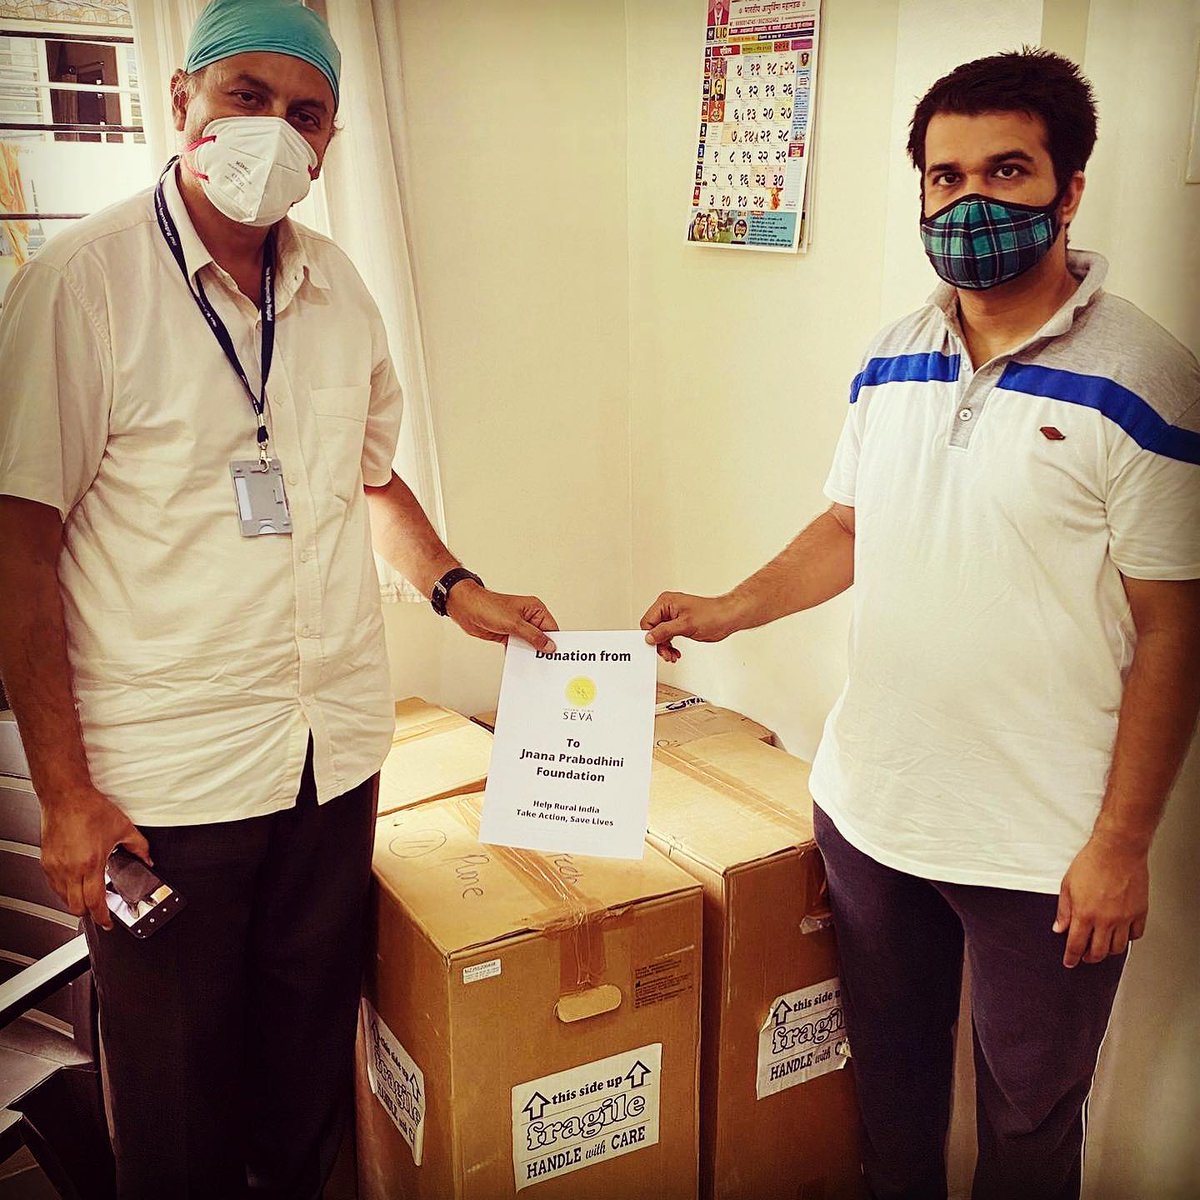 We delivered 3 O2 concentrators to Ambajogai.
They need 25 more! Please help us save more lives at Indiantownseva.org 
#helpruralindiabreathe #indiafightscoronavirus #indiafightscorona #indiafightcorona #indiafightscovid19 #IndiaNeedsOxygen  #IndiaCovidCrisis #CovidResources